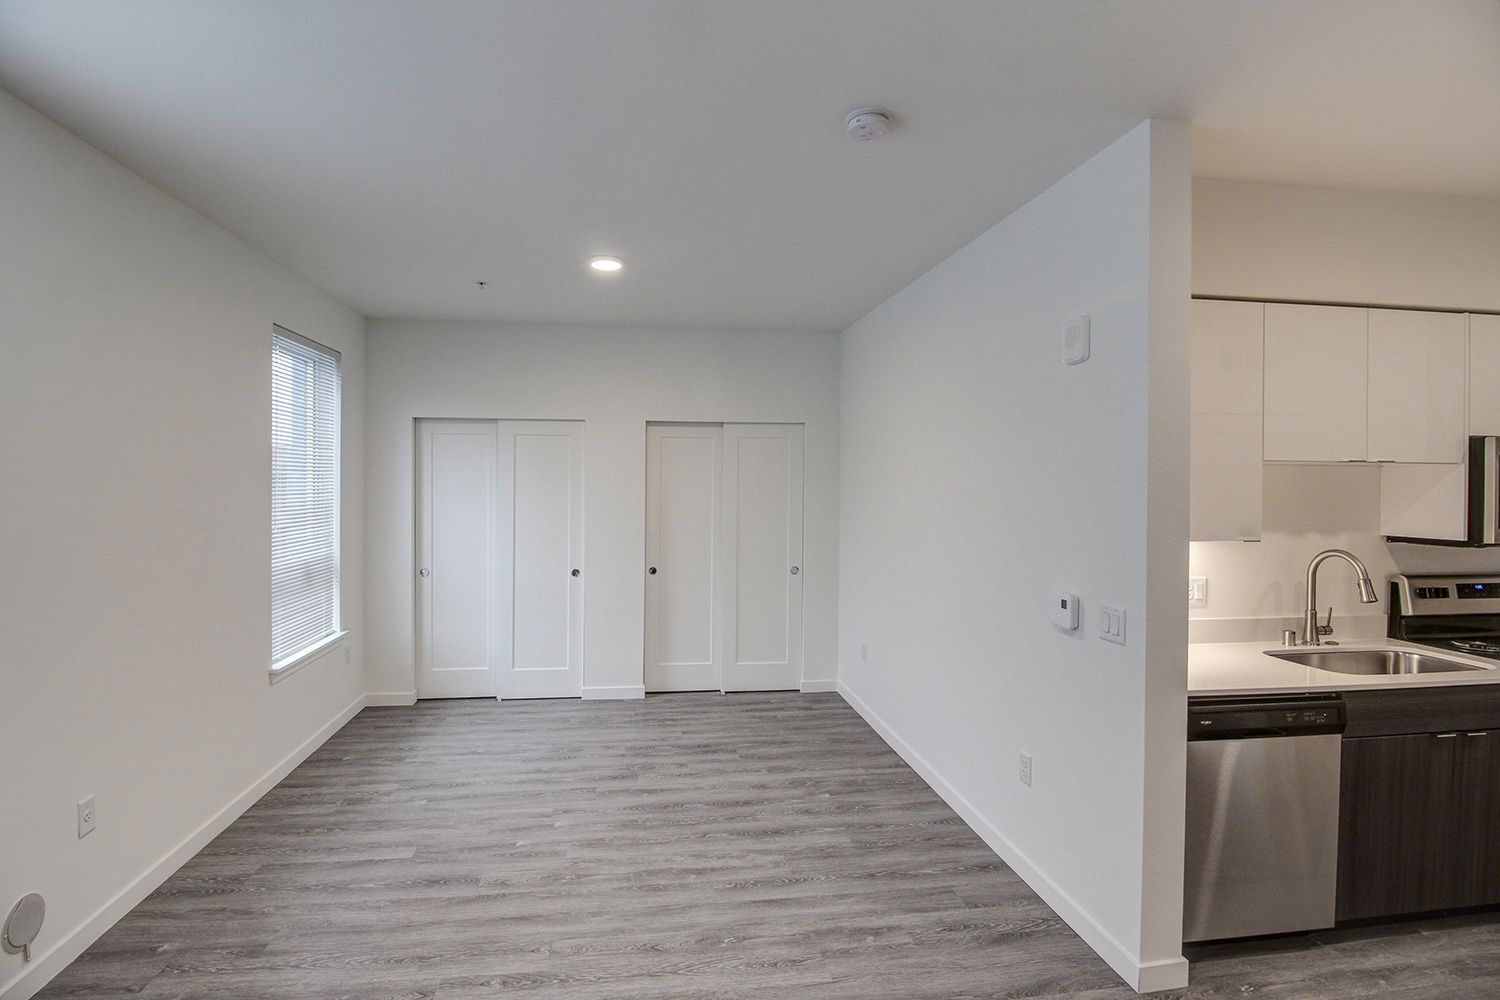 Bedroom space in a studio apartment at The Woods at Alderwood in Lynnwood, WA.